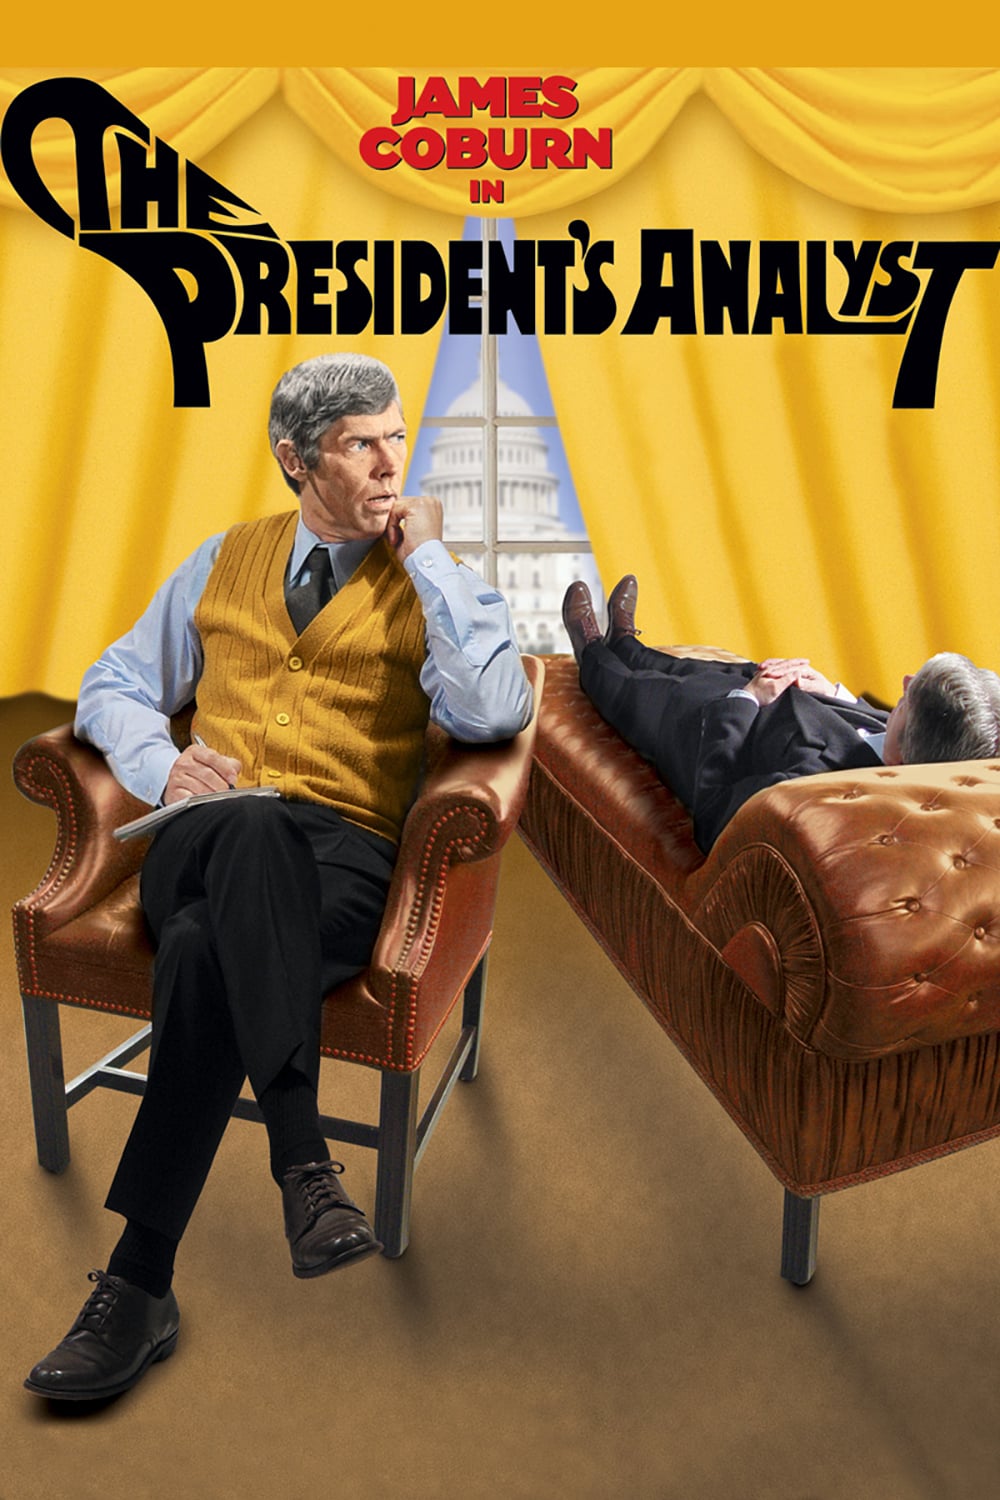 Poster for the movie "The President's Analyst"